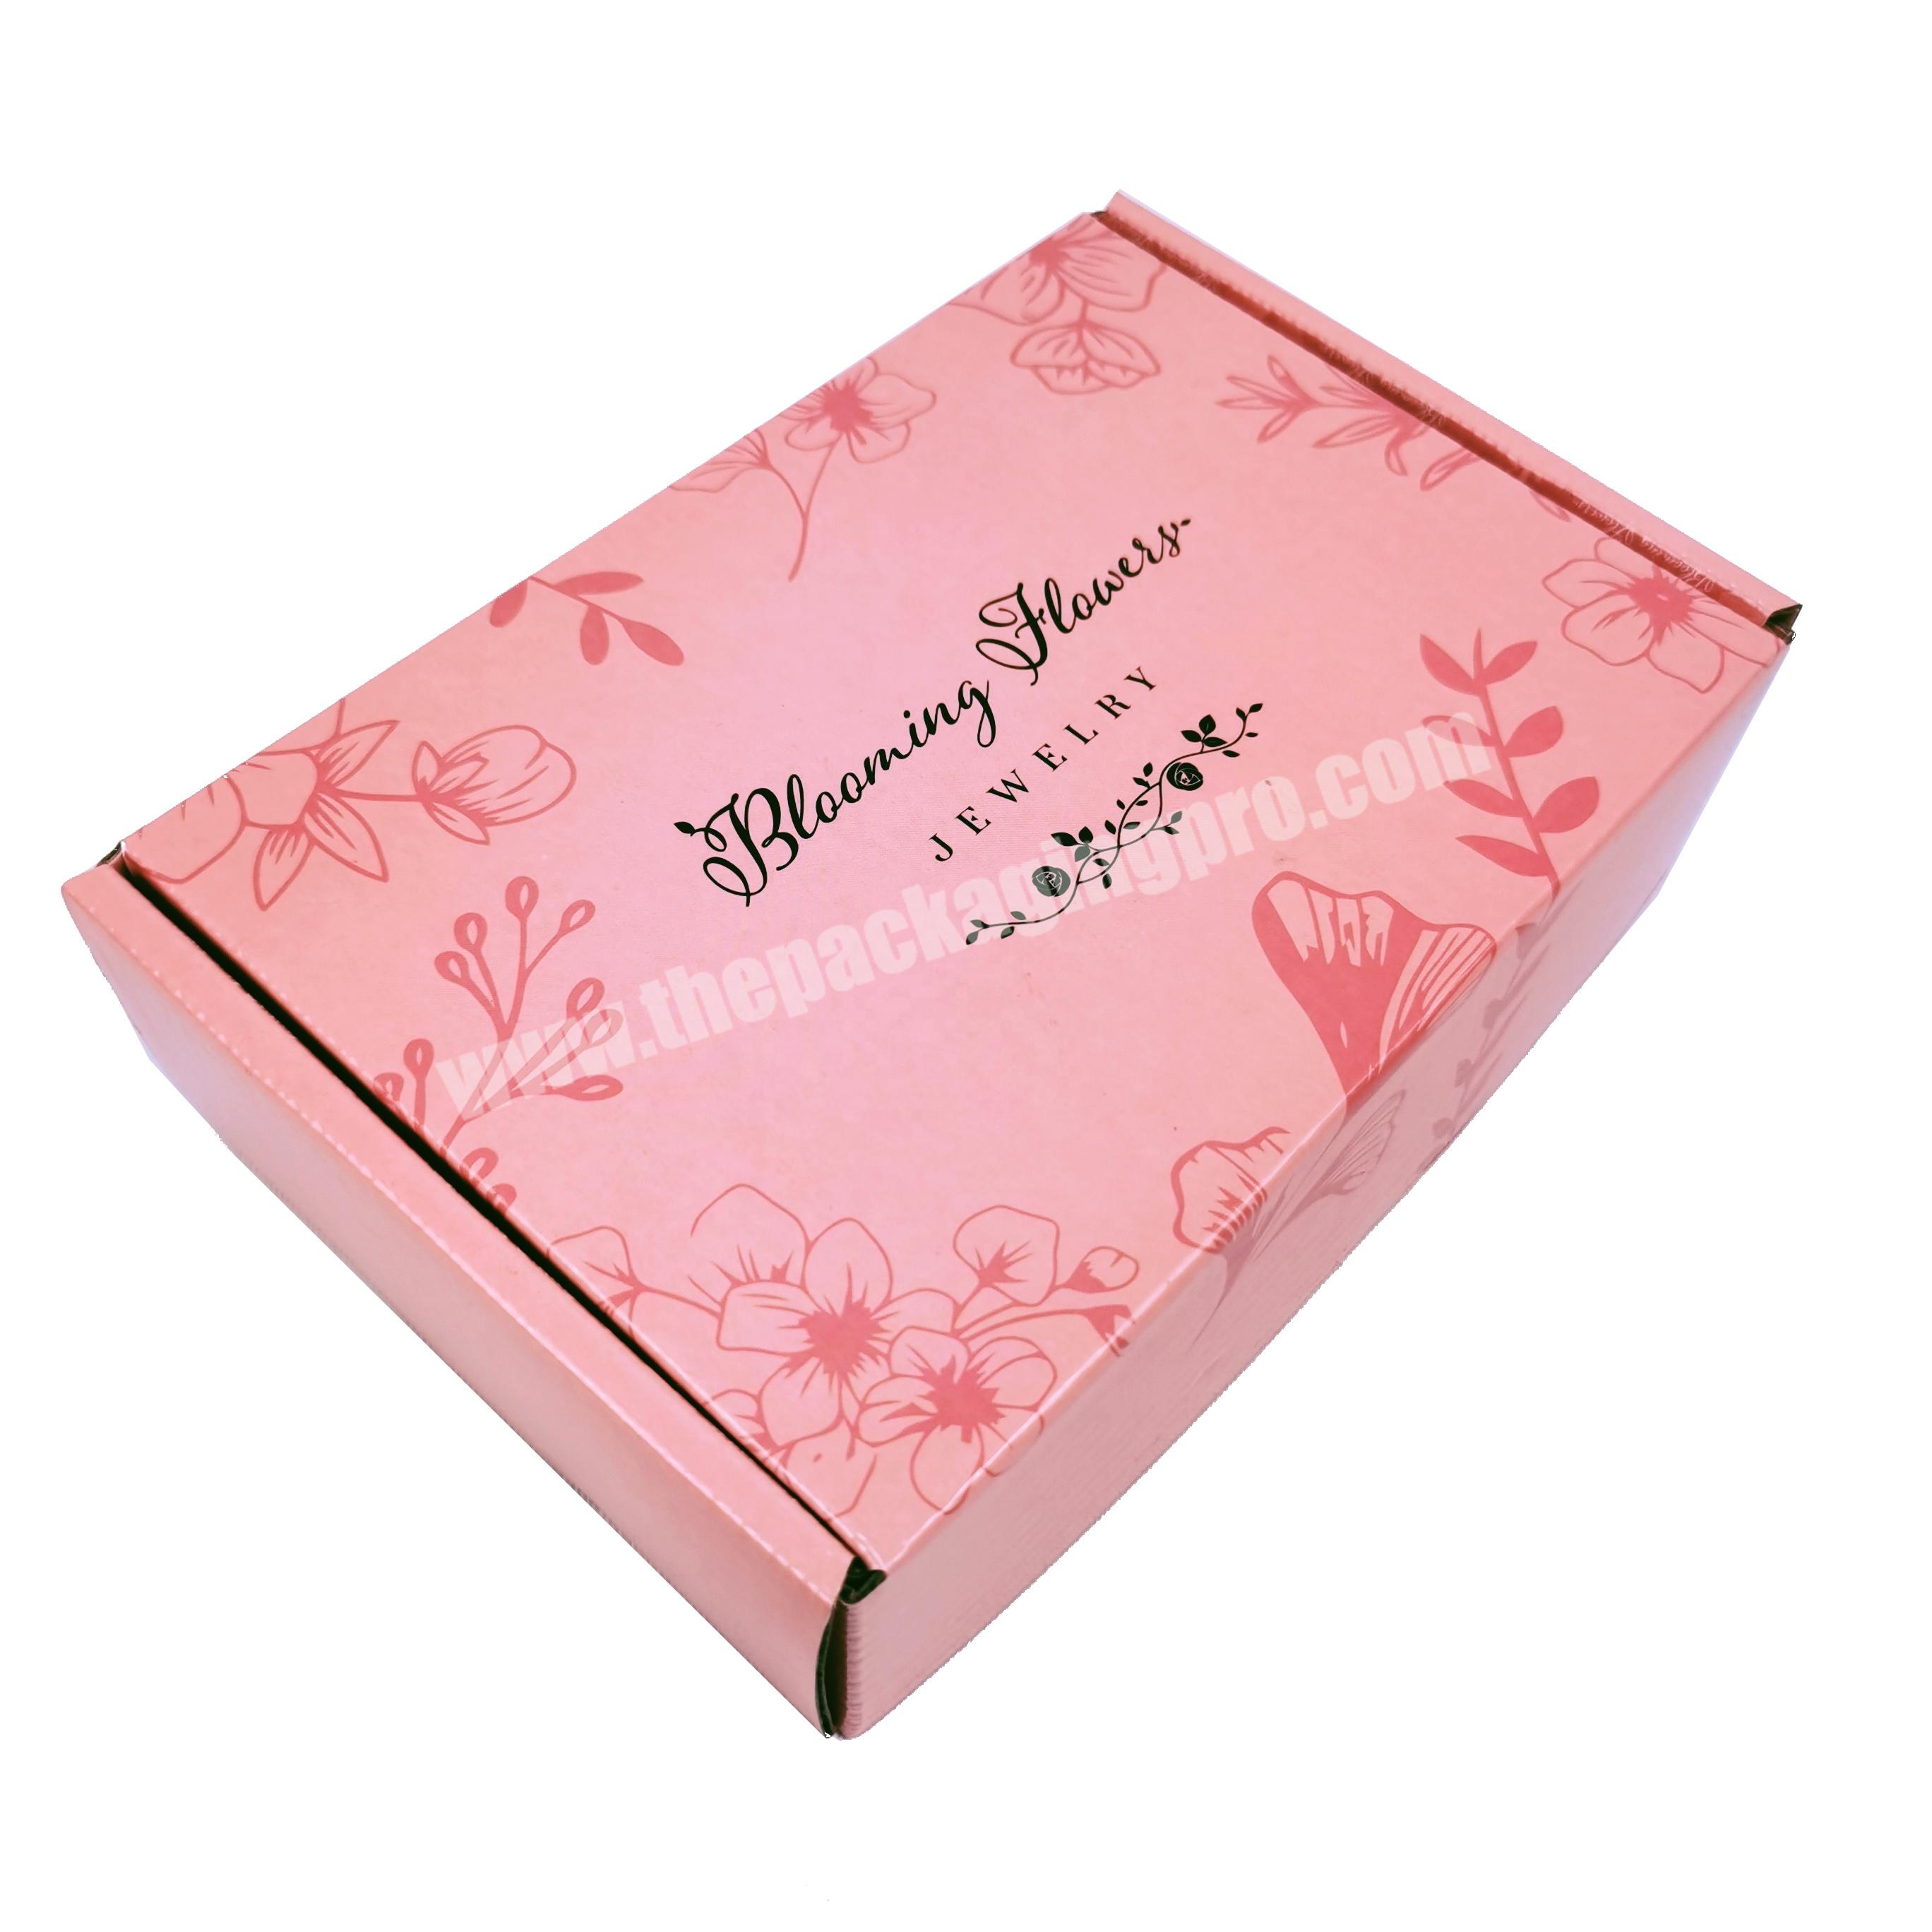 Luxury pink jewelry box paper box package gift paper box with own logo printed